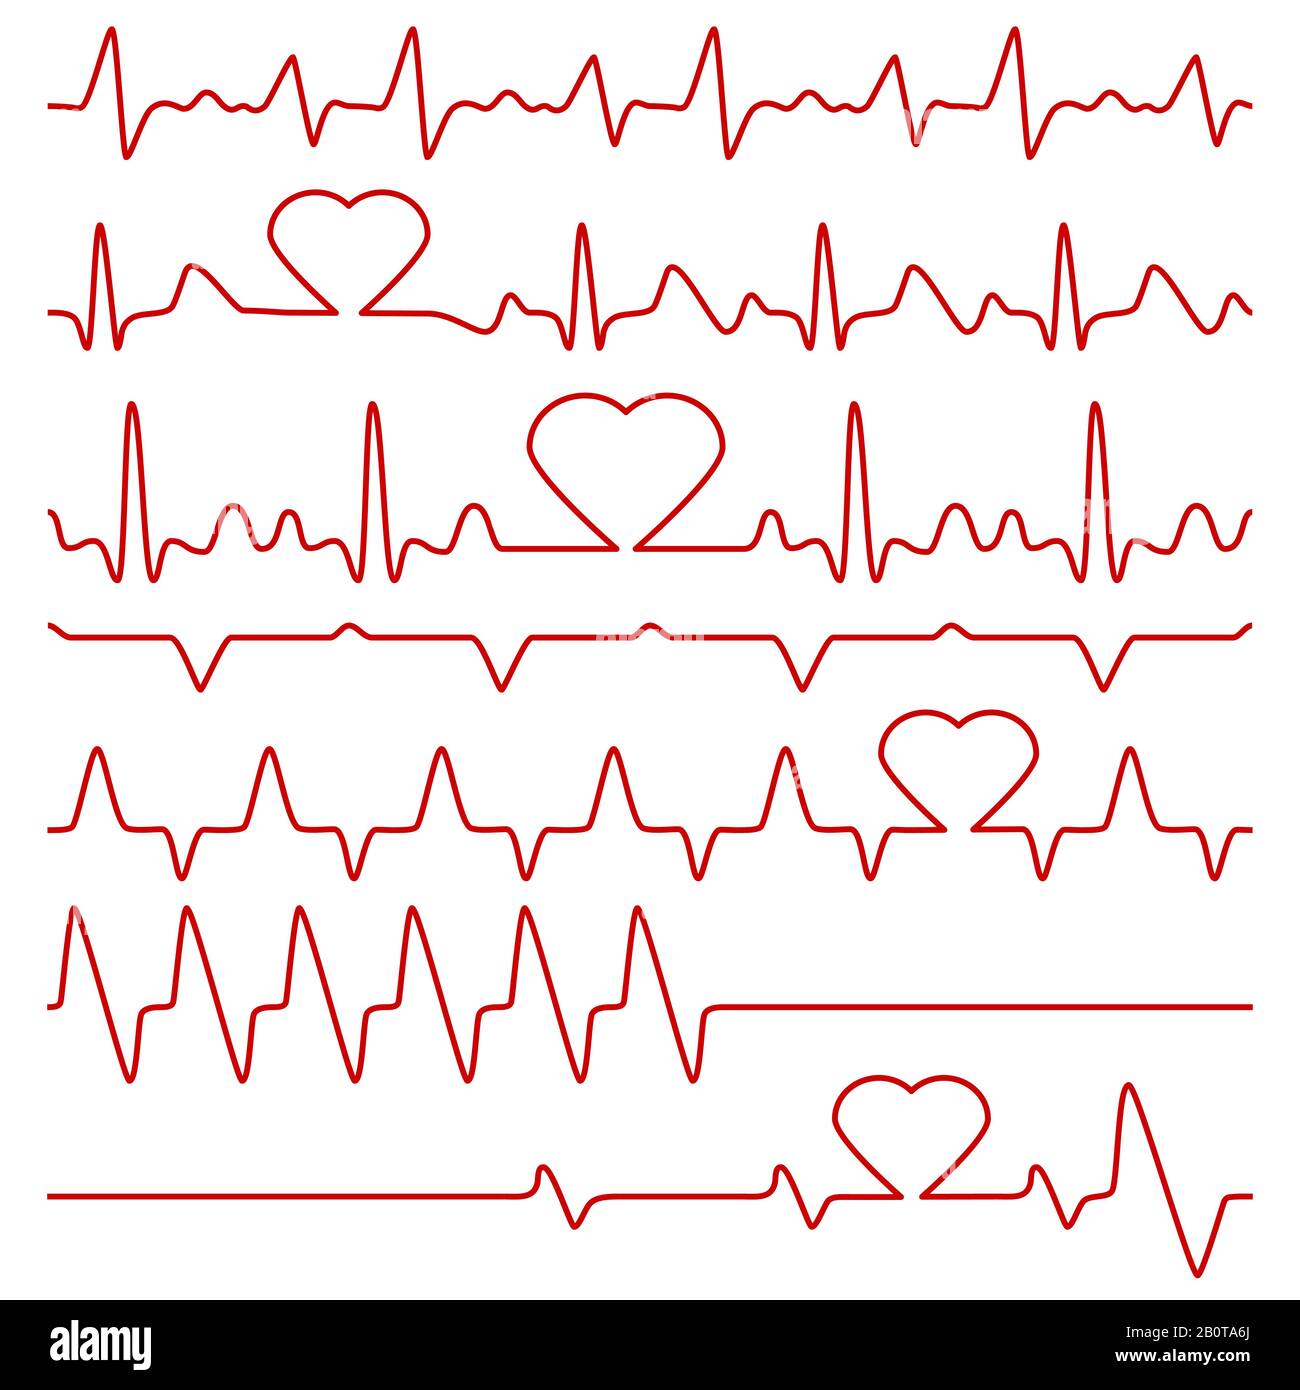 Cardiogram and pulse vector symbols with heart shape. Medical cardiogram, illustration of red line frequency cardiogram Stock Vector